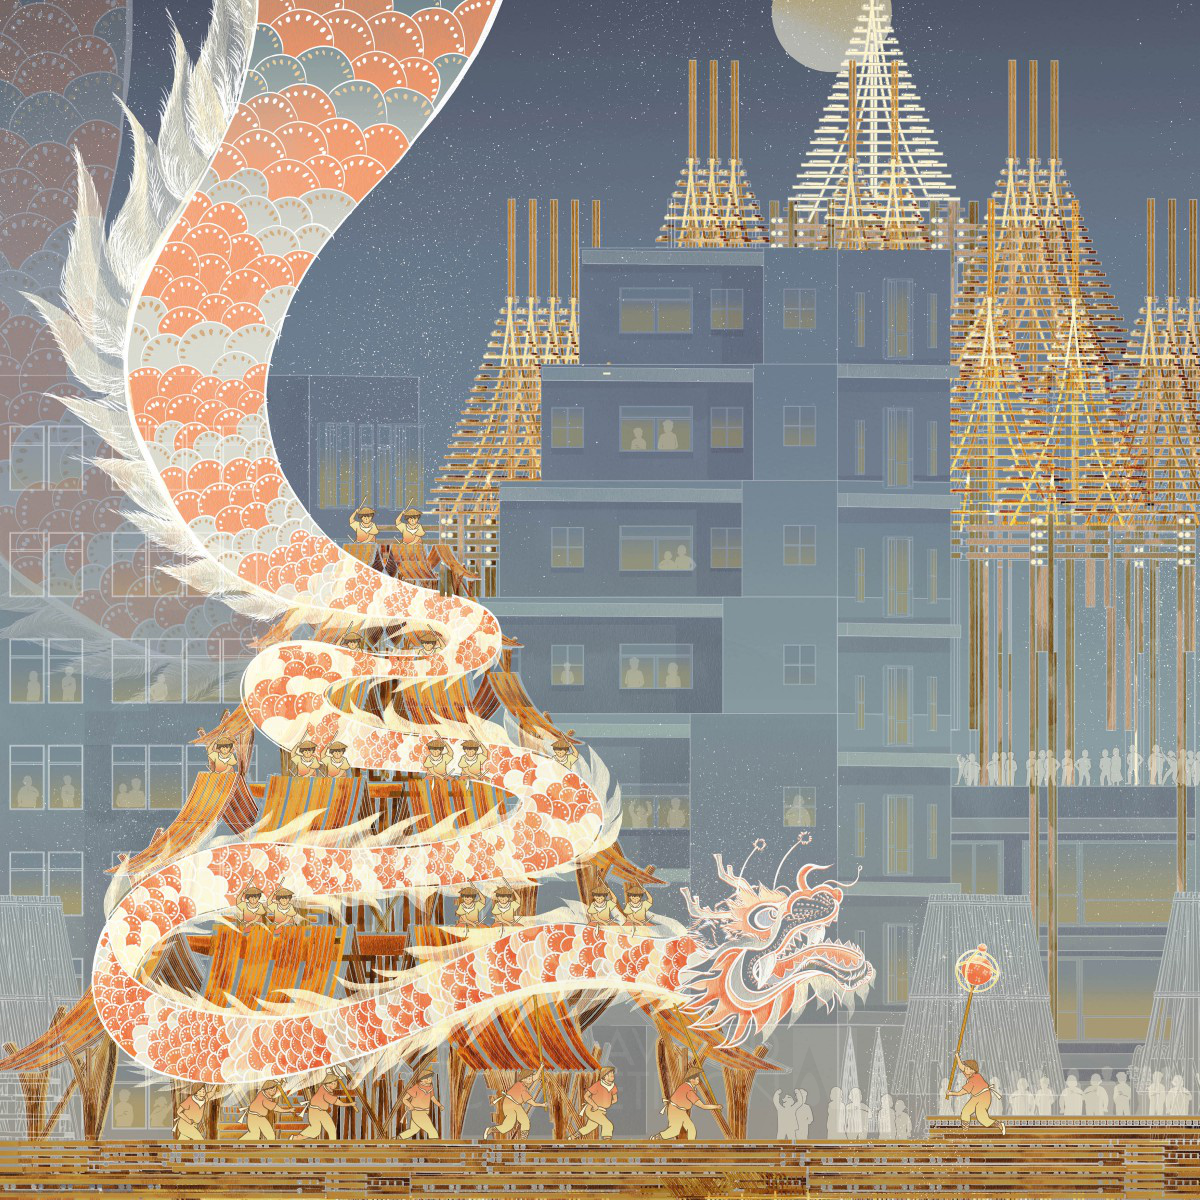 Wing Sze Wincy Kung Architectural Narrative Illustration